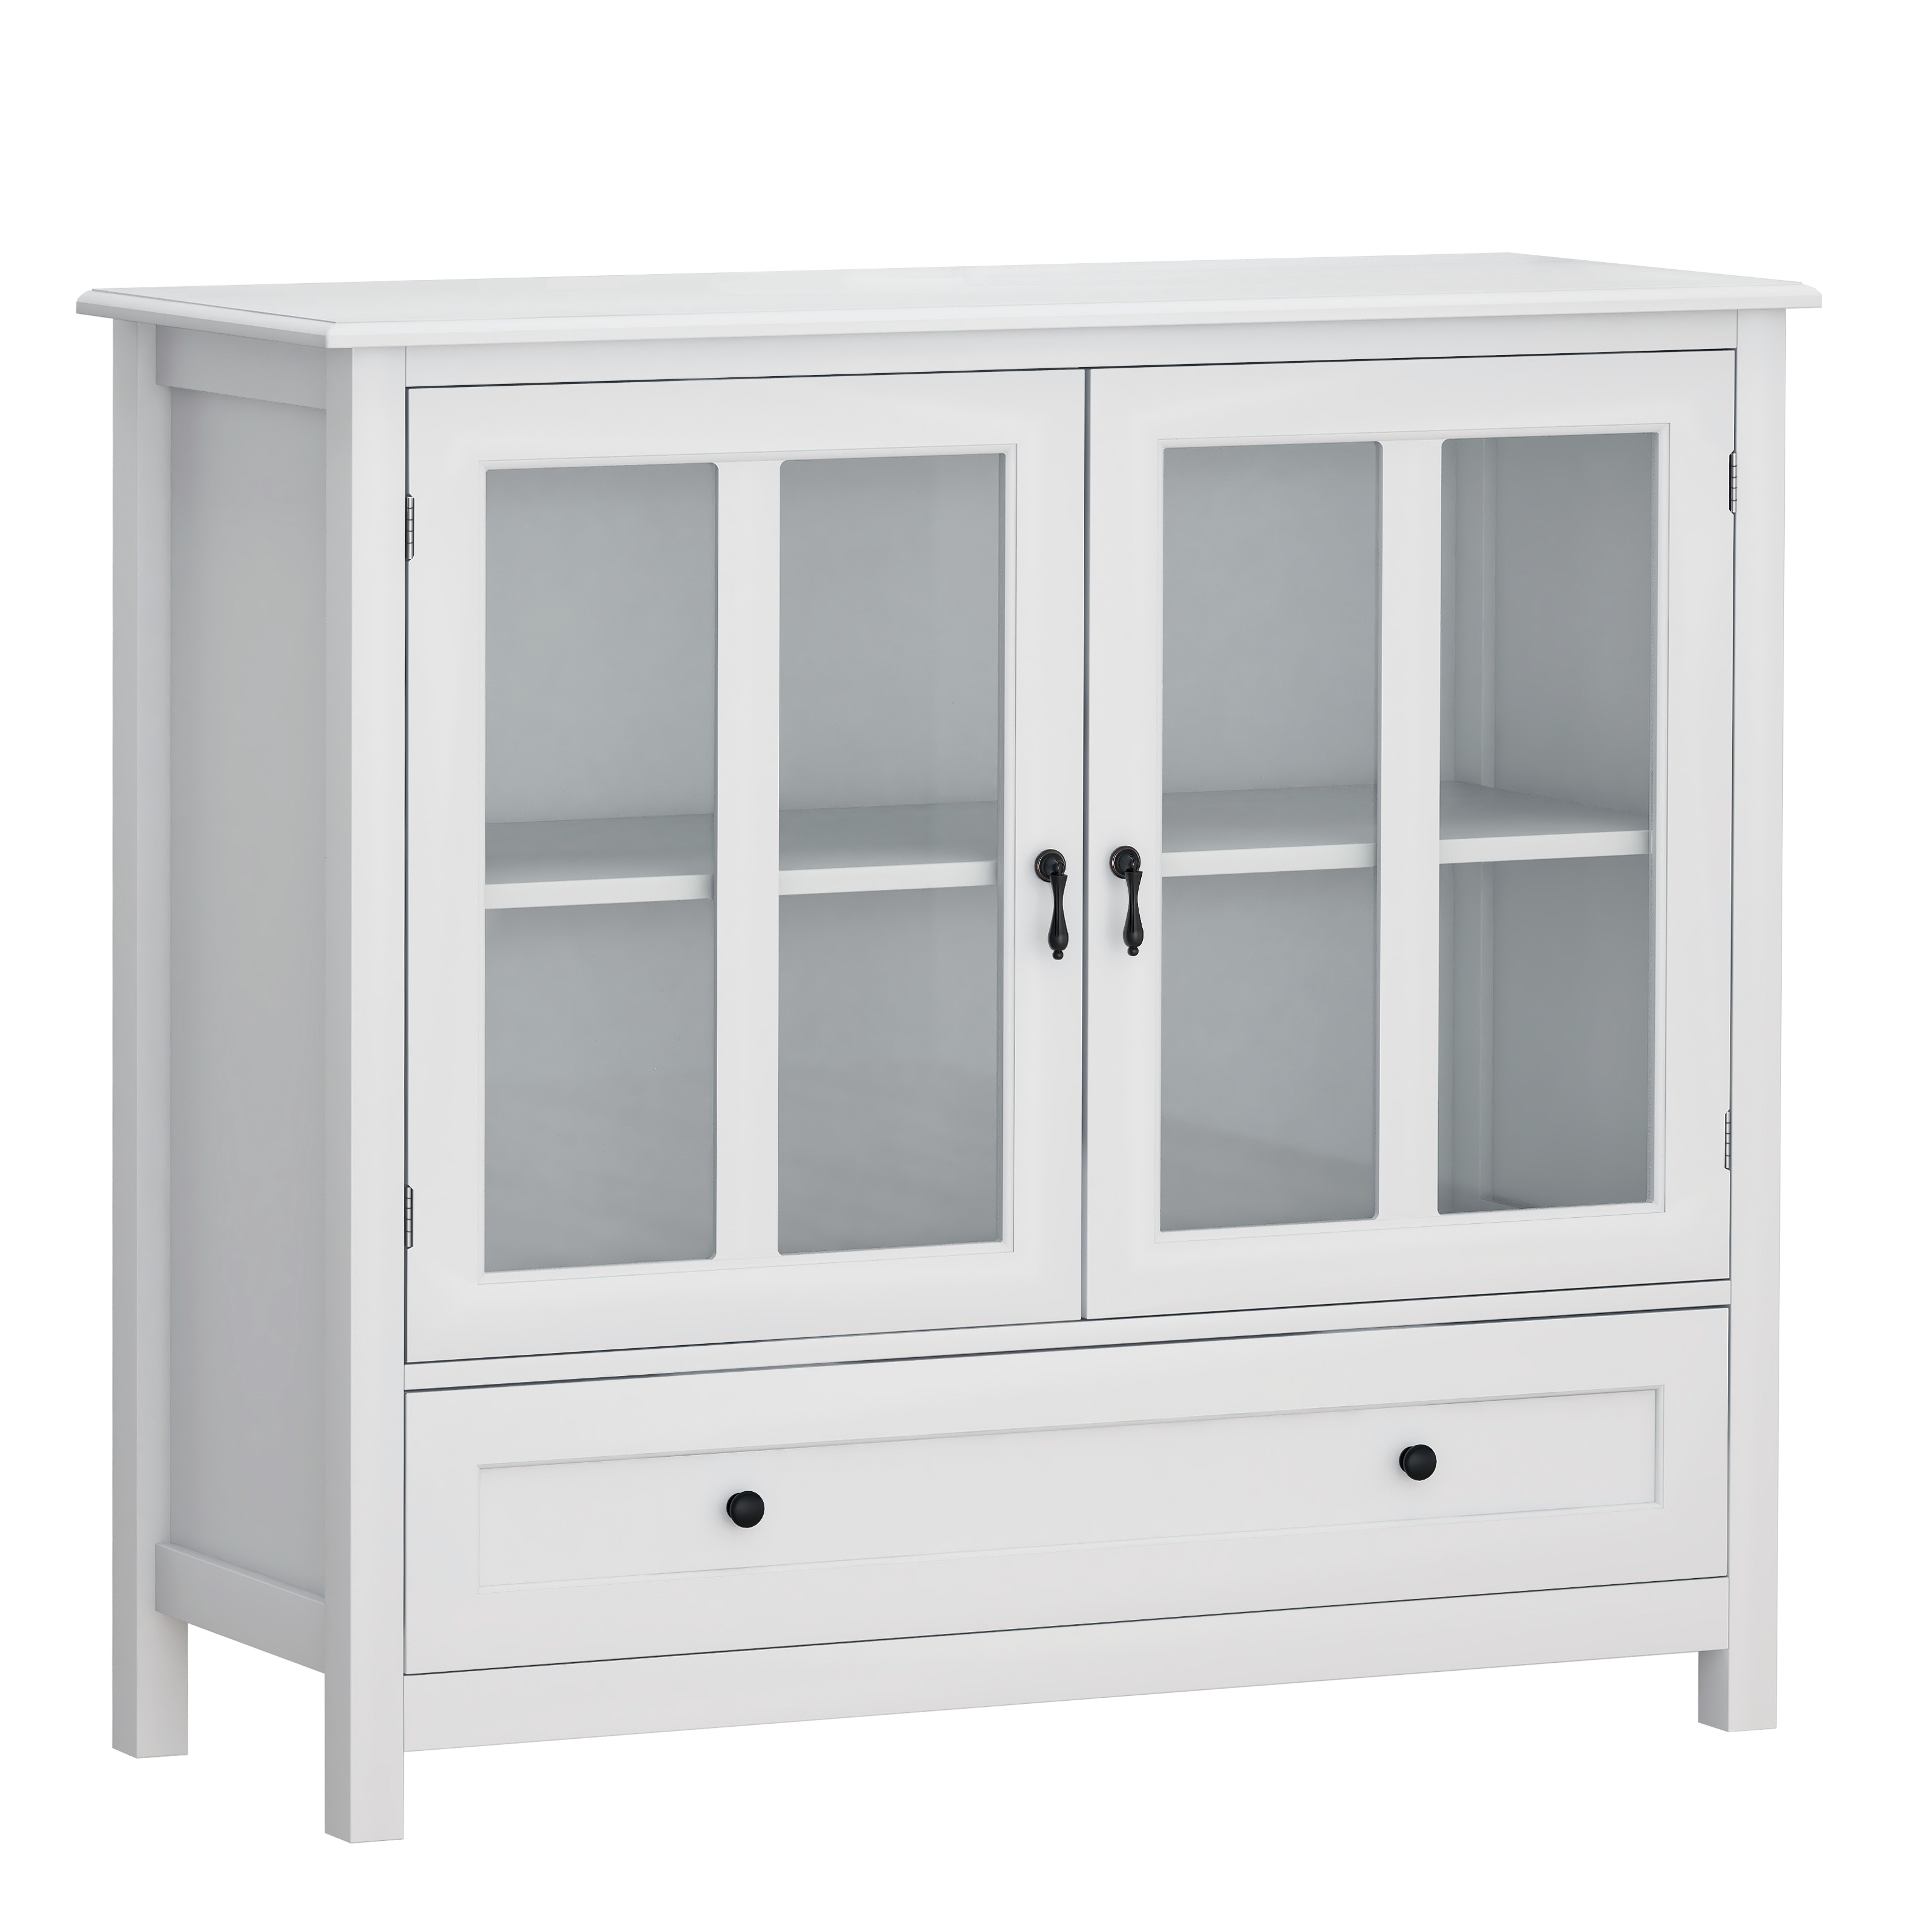 Buffet storage cabinet with double glass doors and unique bell handle-CASAINC